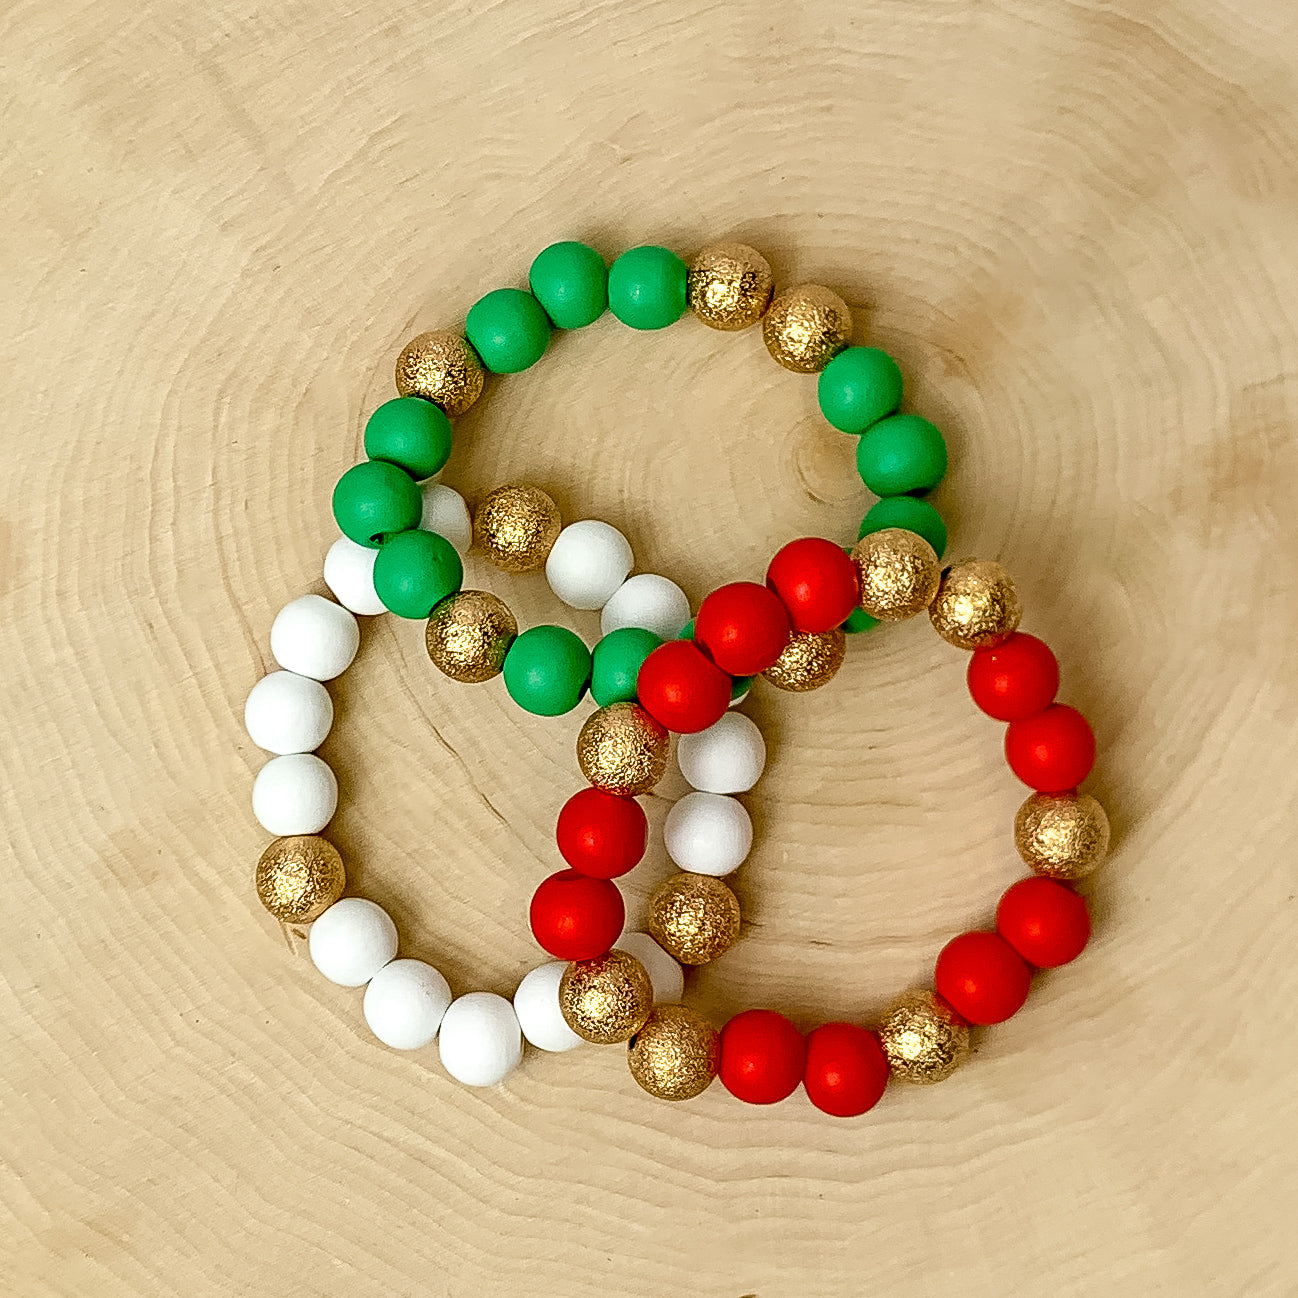 Coming To Town Set of 3 Stretchy Beaded Bracelets in Green, Red, and White - Giddy Up Glamour Boutique